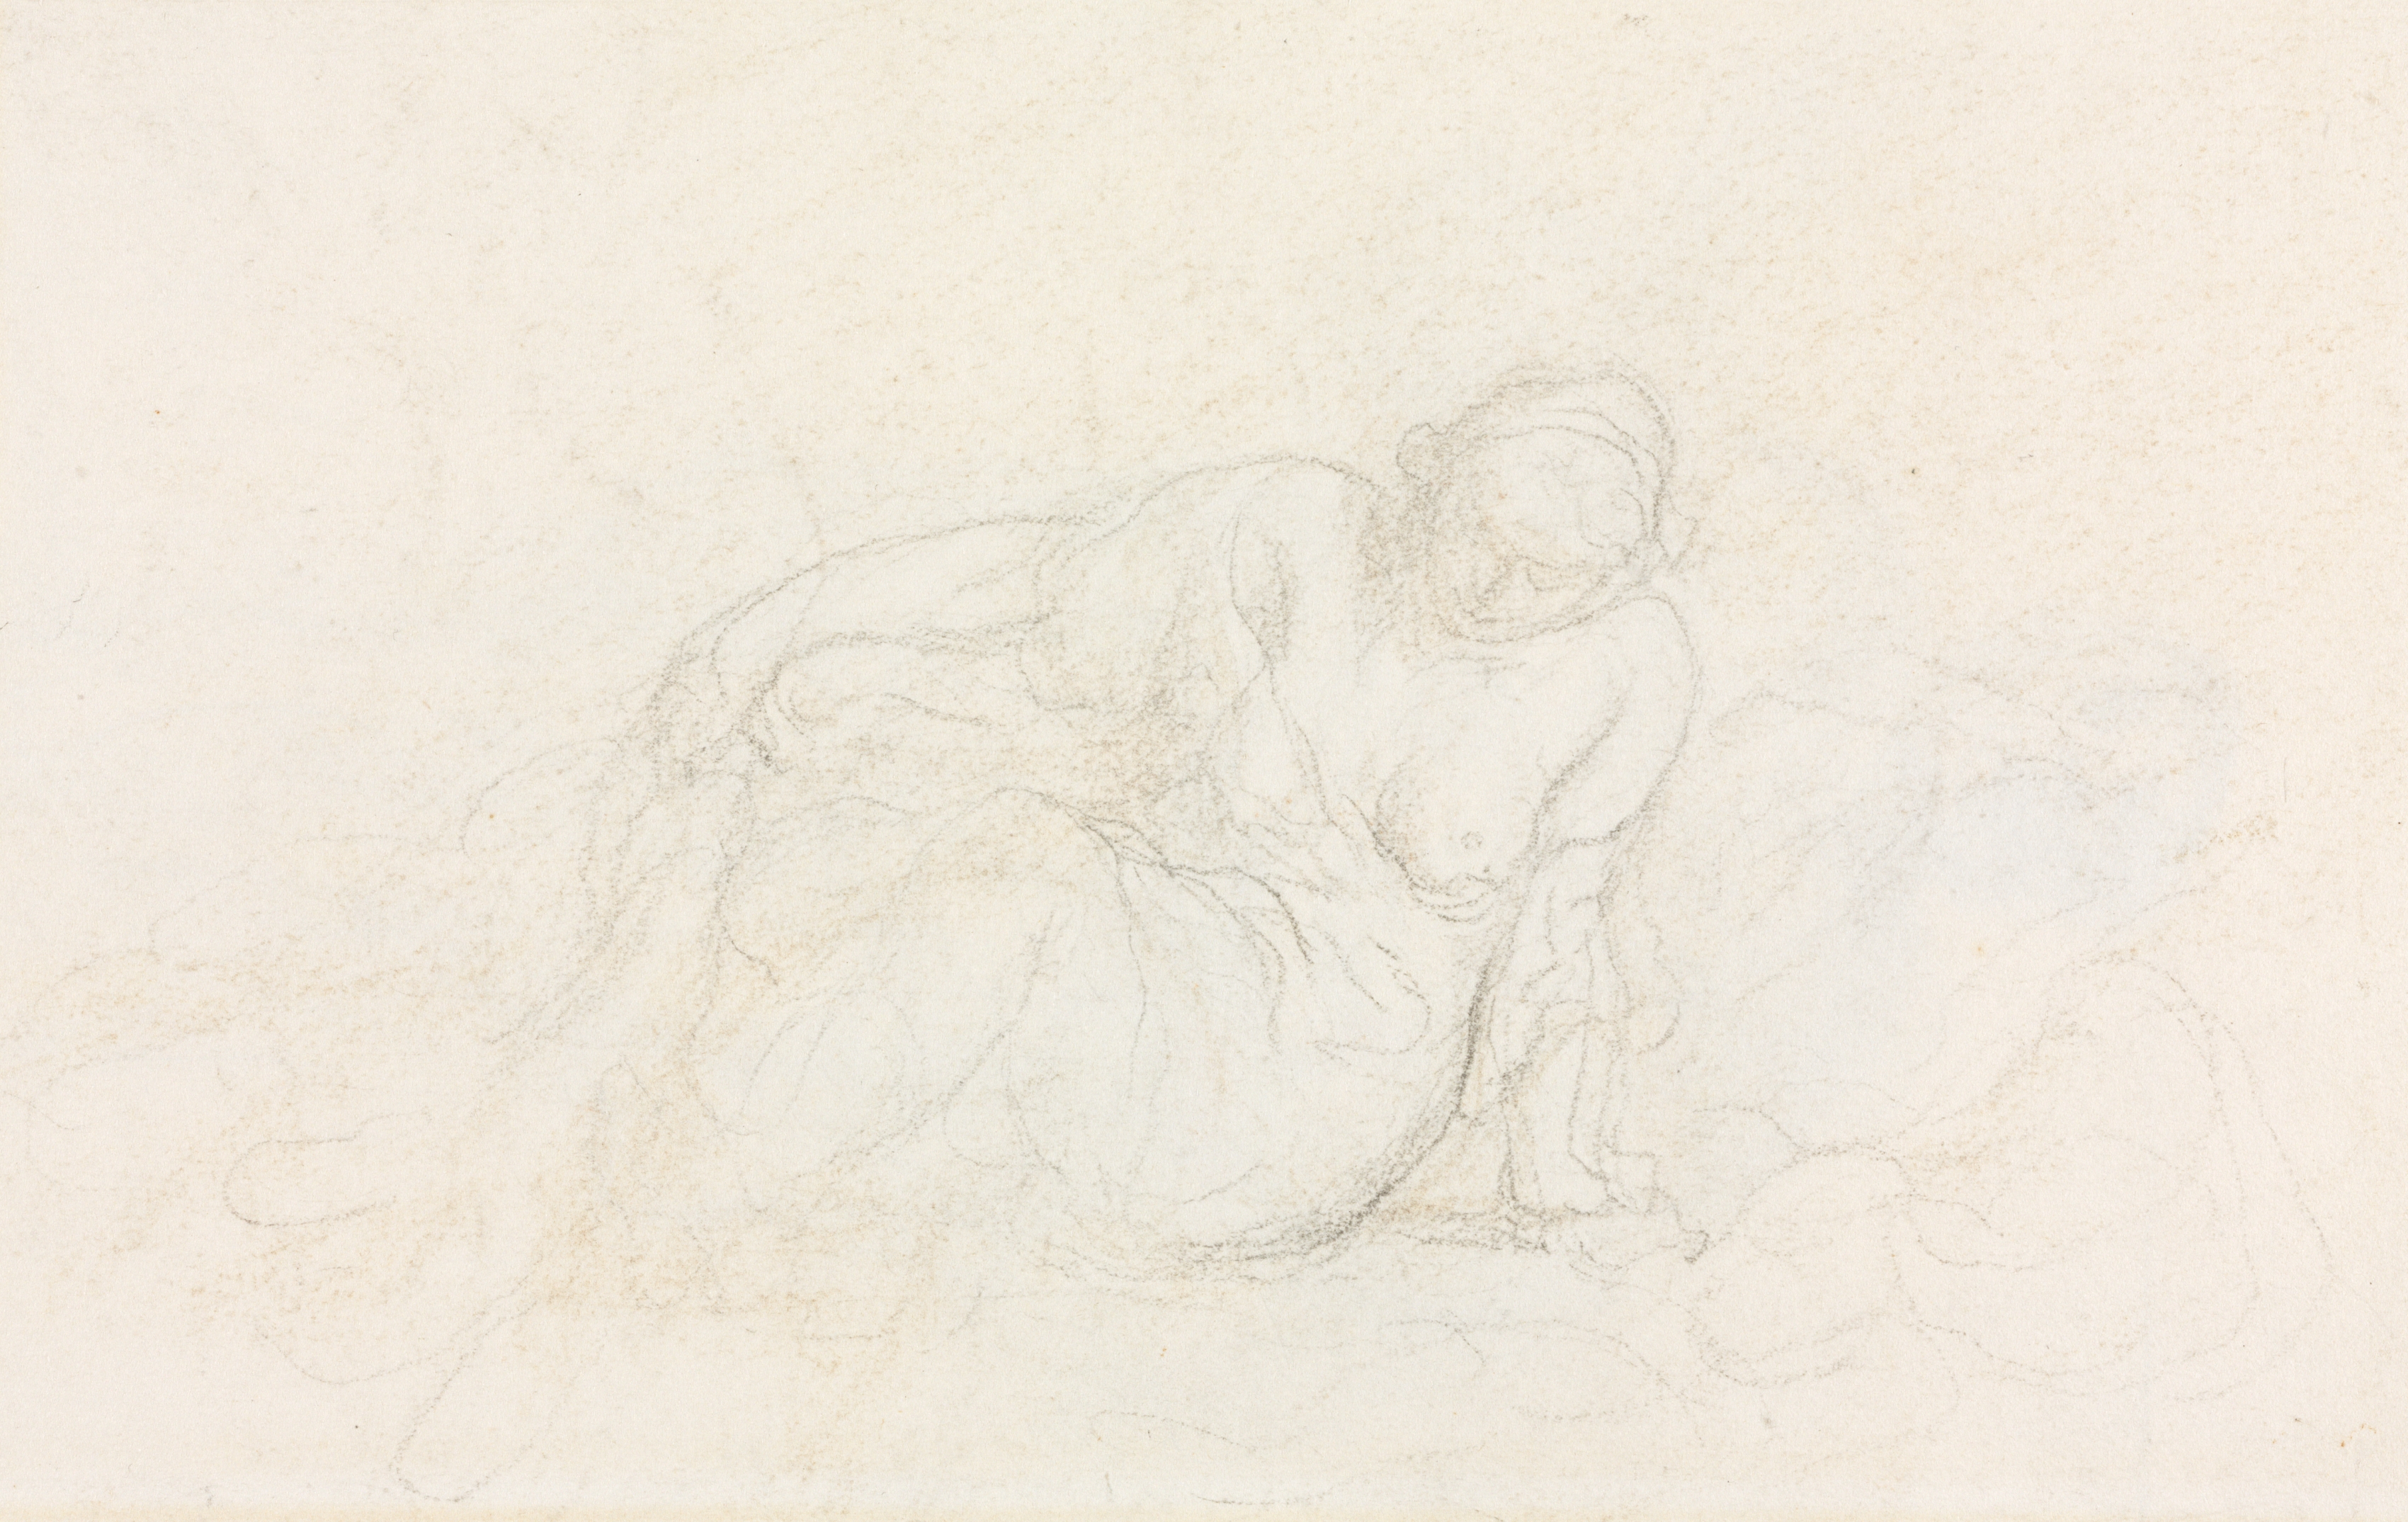 Reclining Woman Leaning on Her Arm (verso)